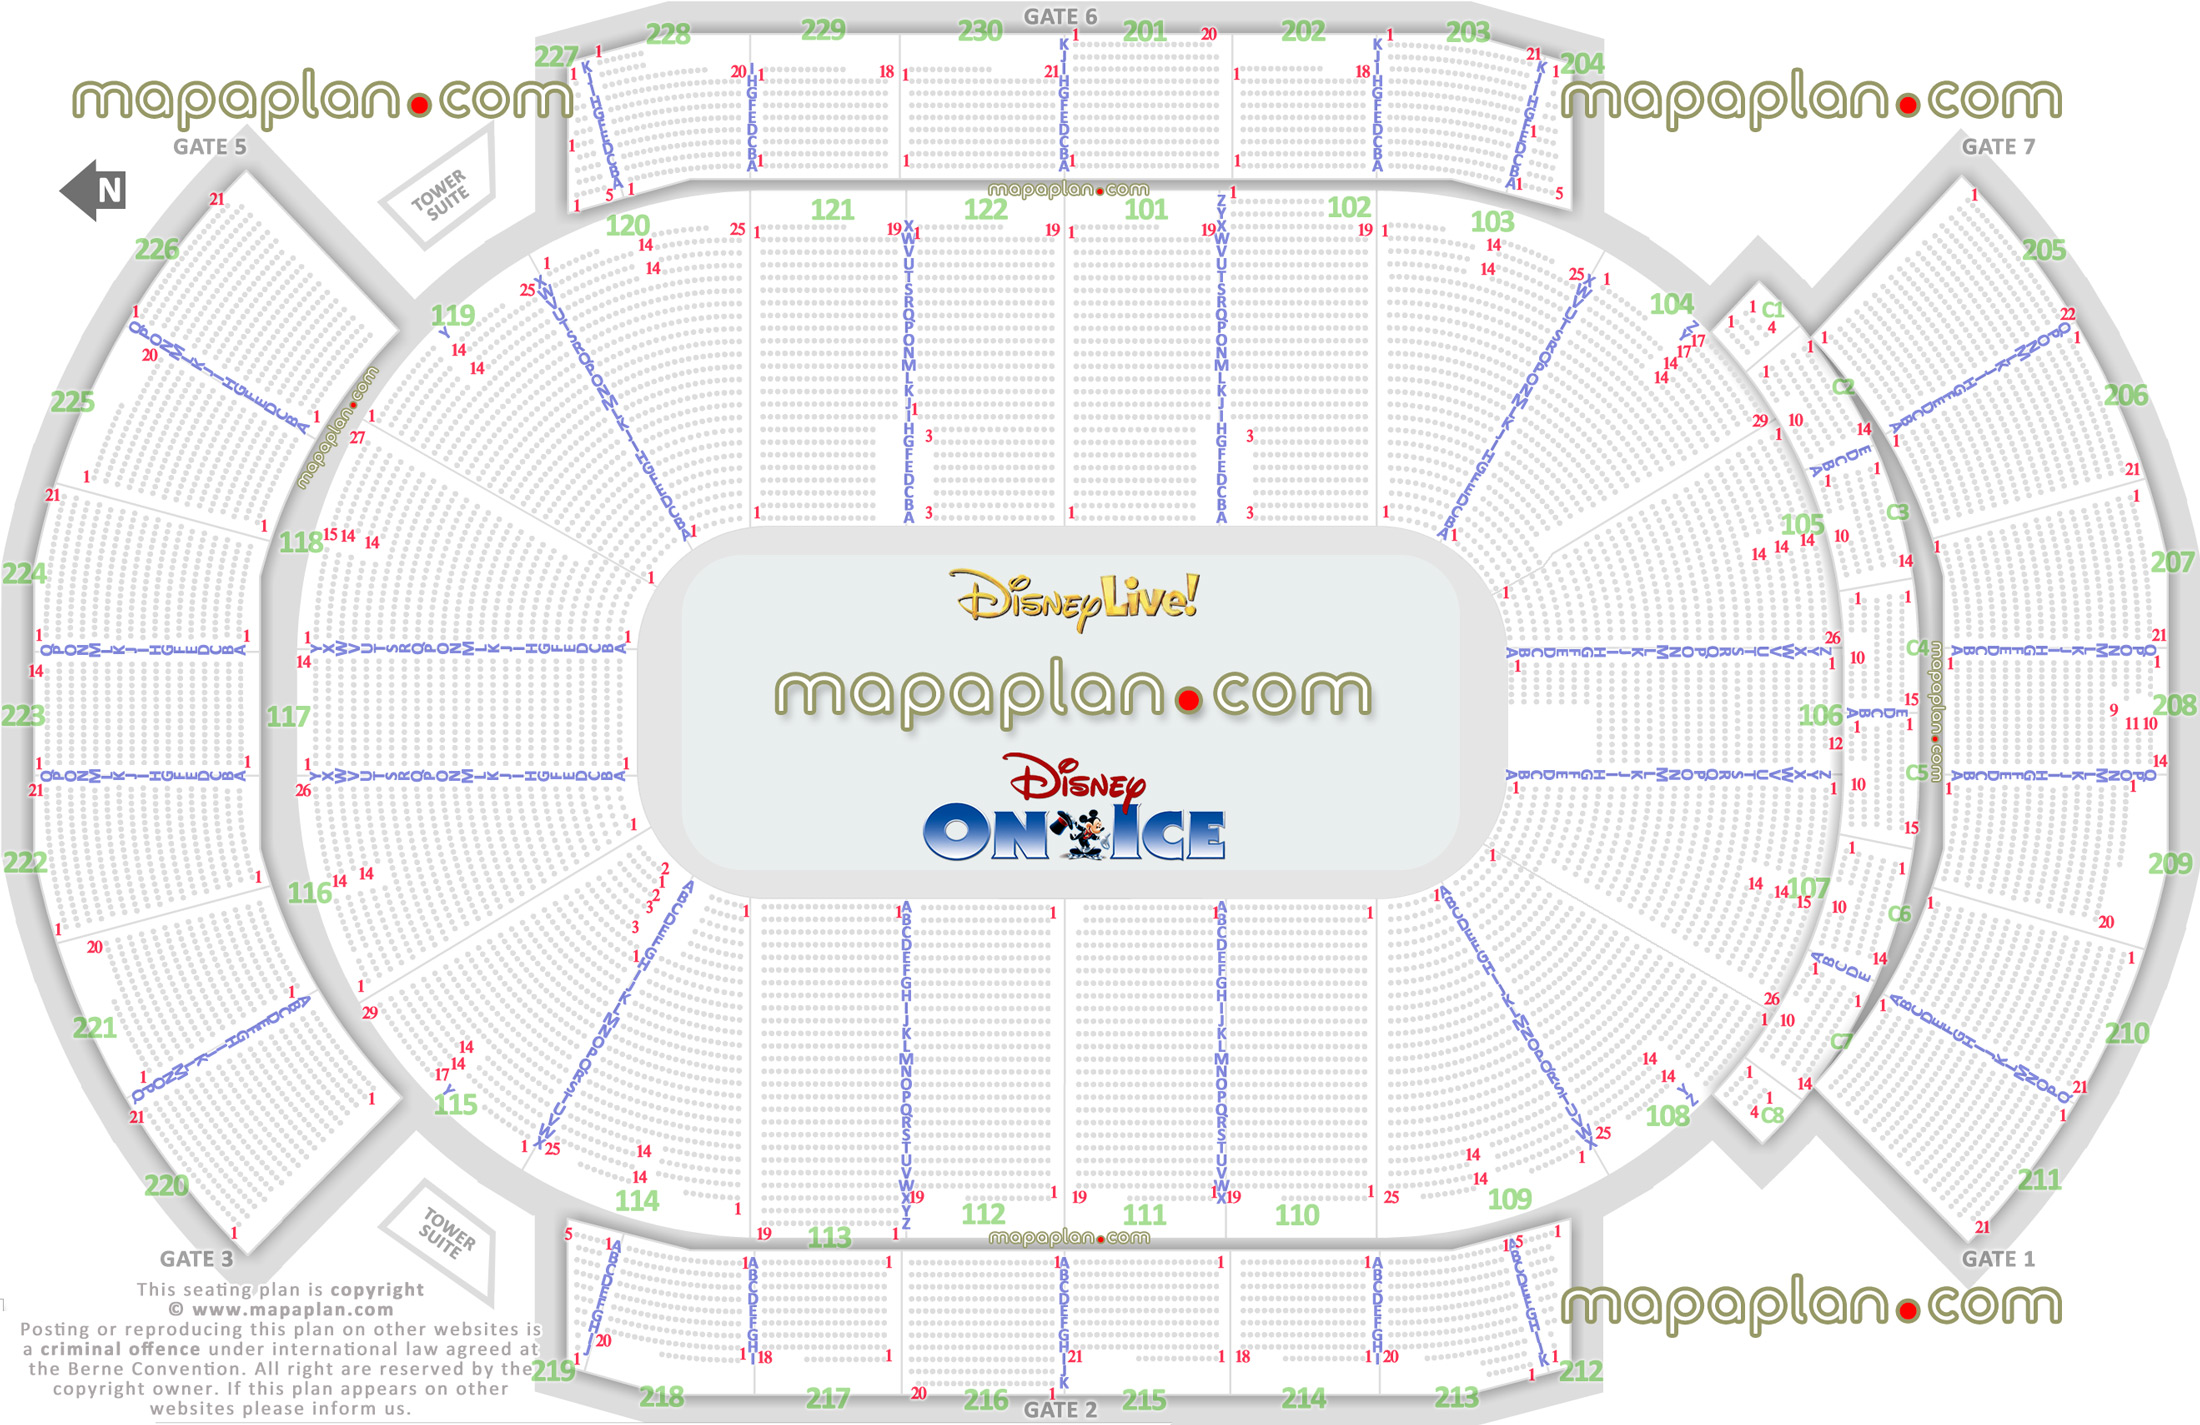 disney ice live glendale az usa best seat finder 3d interactive virtual tool precise detailed aisle seat loge box rows numbering location data plan ice rink event floor level map lower bowl concourse club upper balcony seating tower executive suites rows a b c d e f g h i j k l m n o p q r s t u v w x y z Glendale Desert Diamond Arena seating chart